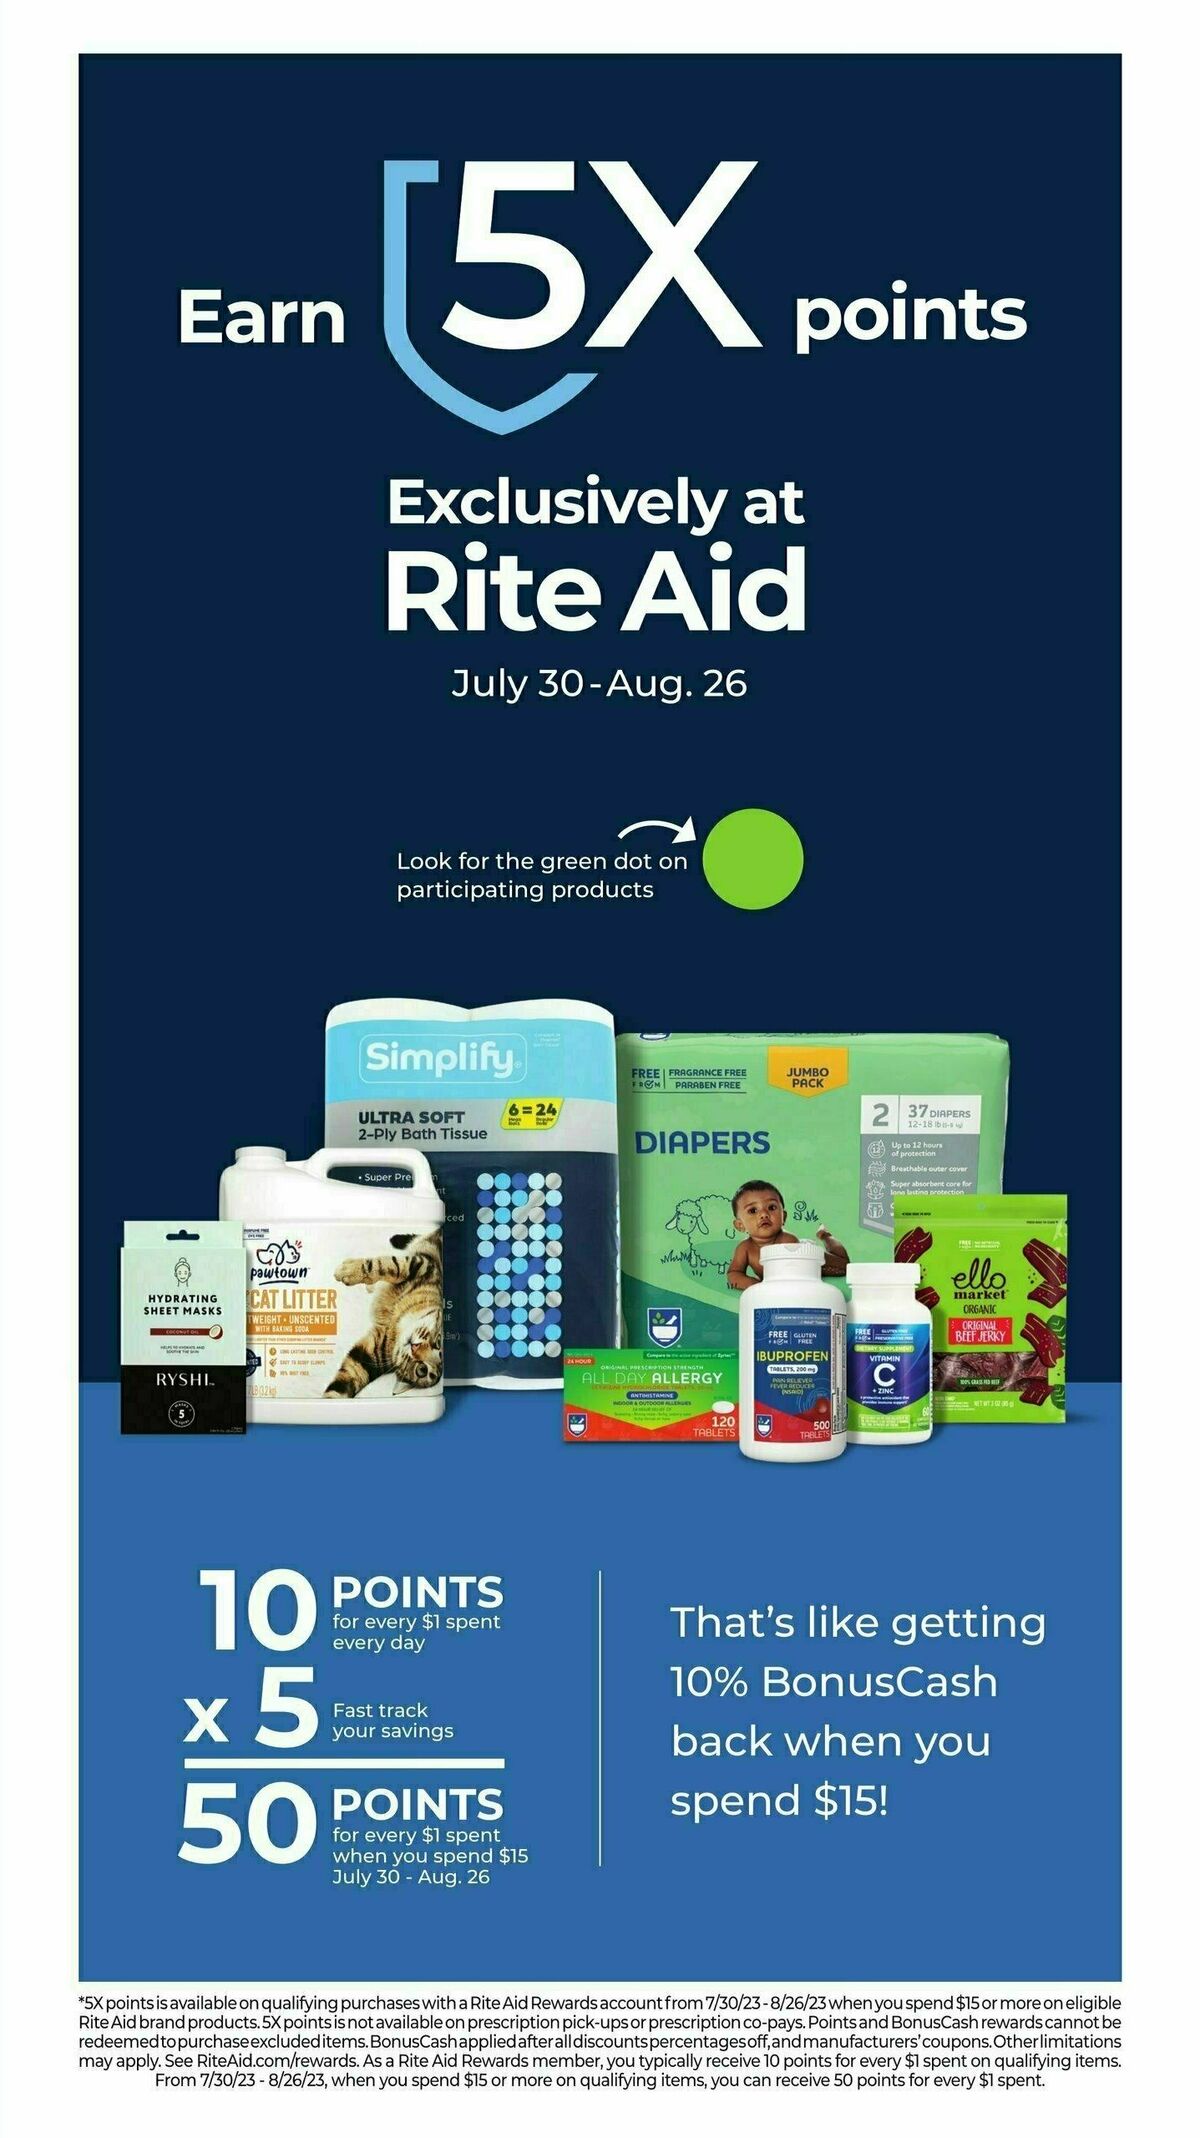 Rite Aid Weekly Ad from August 6